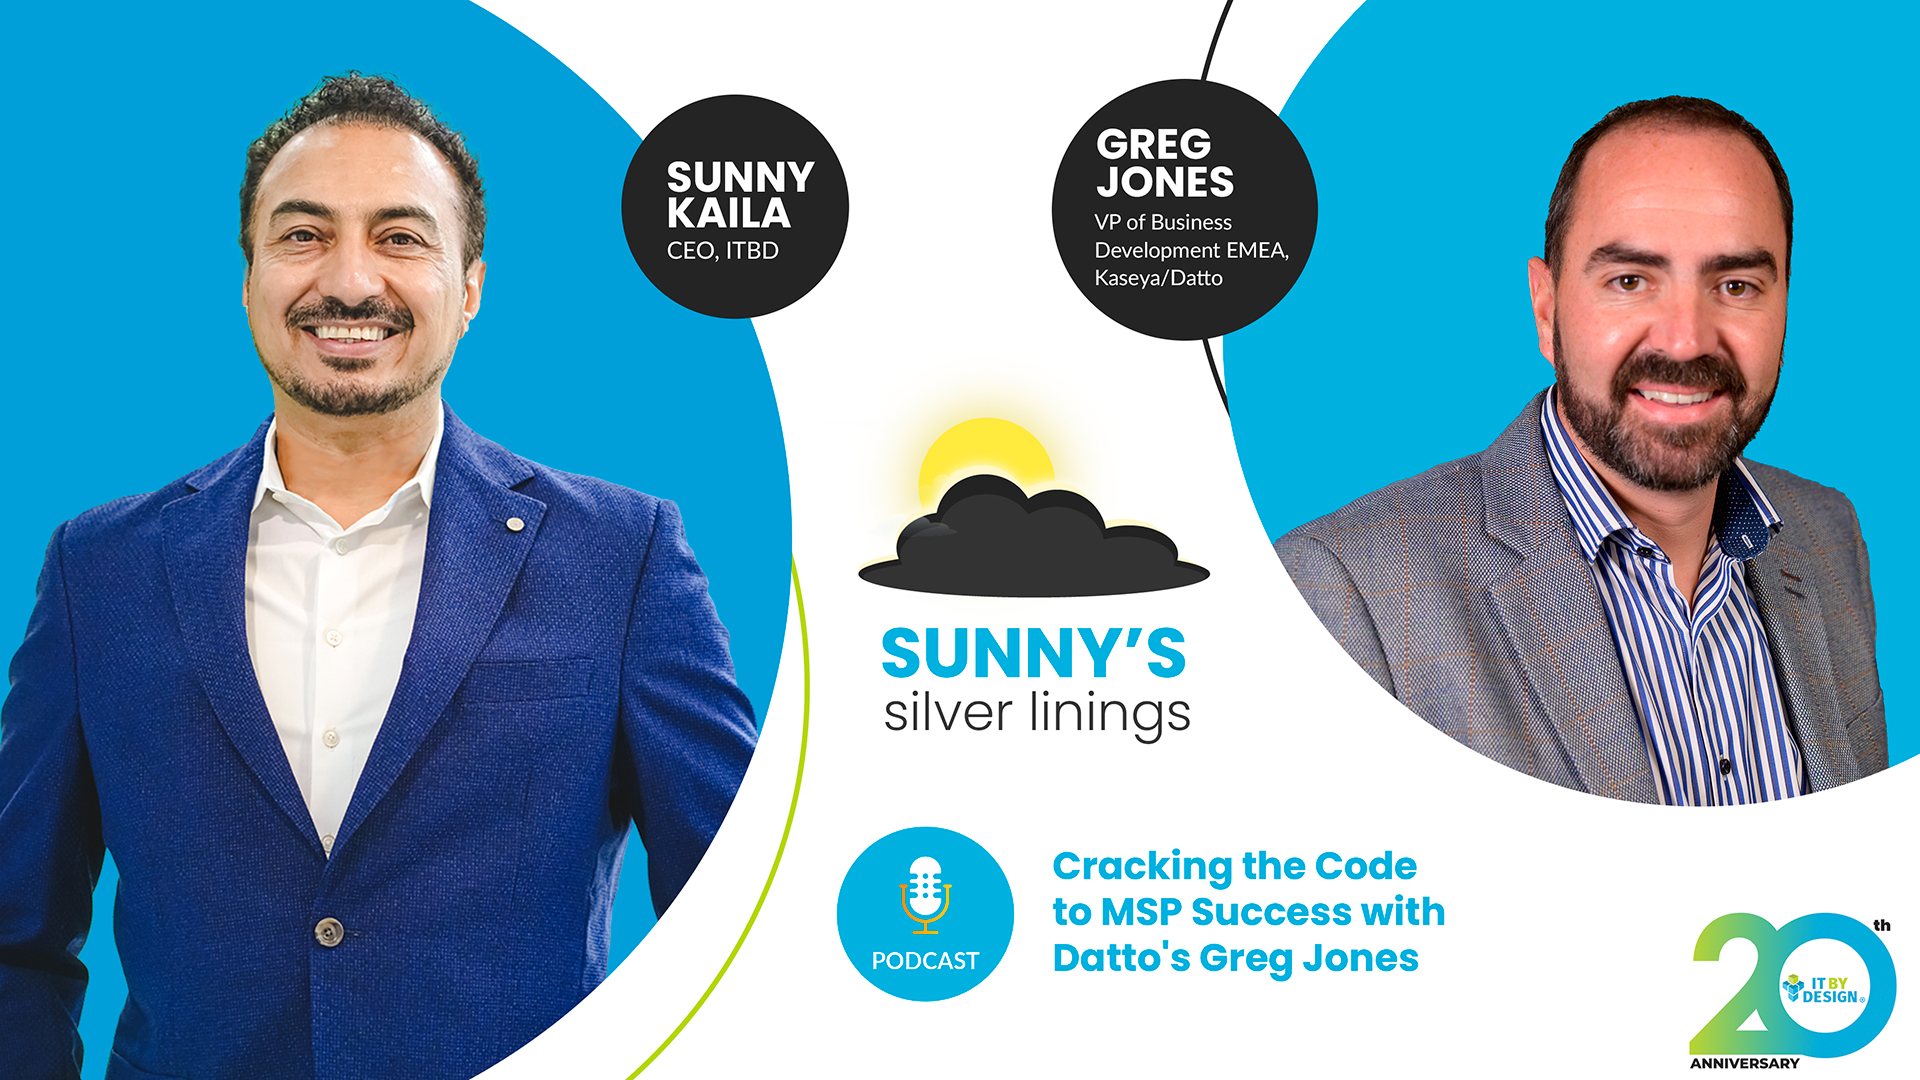 Cracking the Code to MSP Success with Datto’s Greg Jones